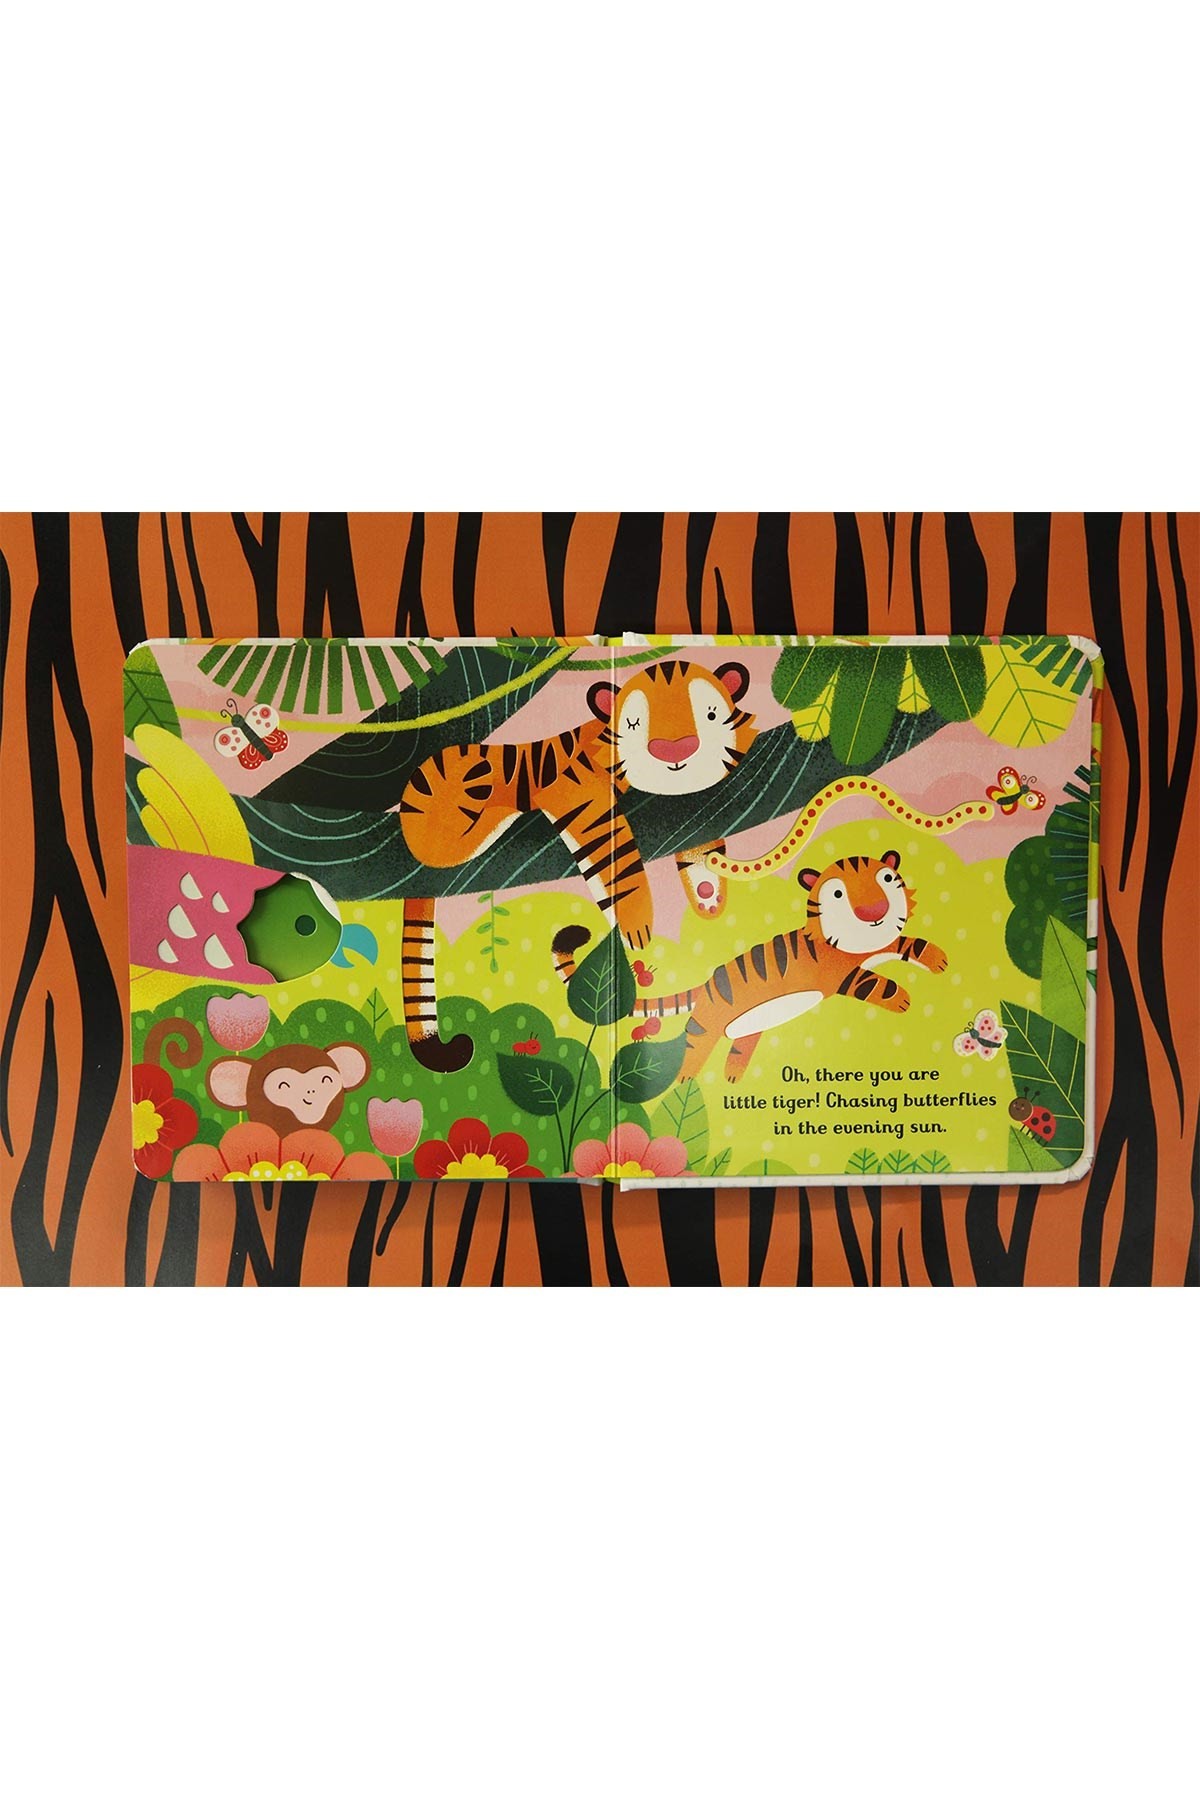 The Usborne Are You There Little Tiger?